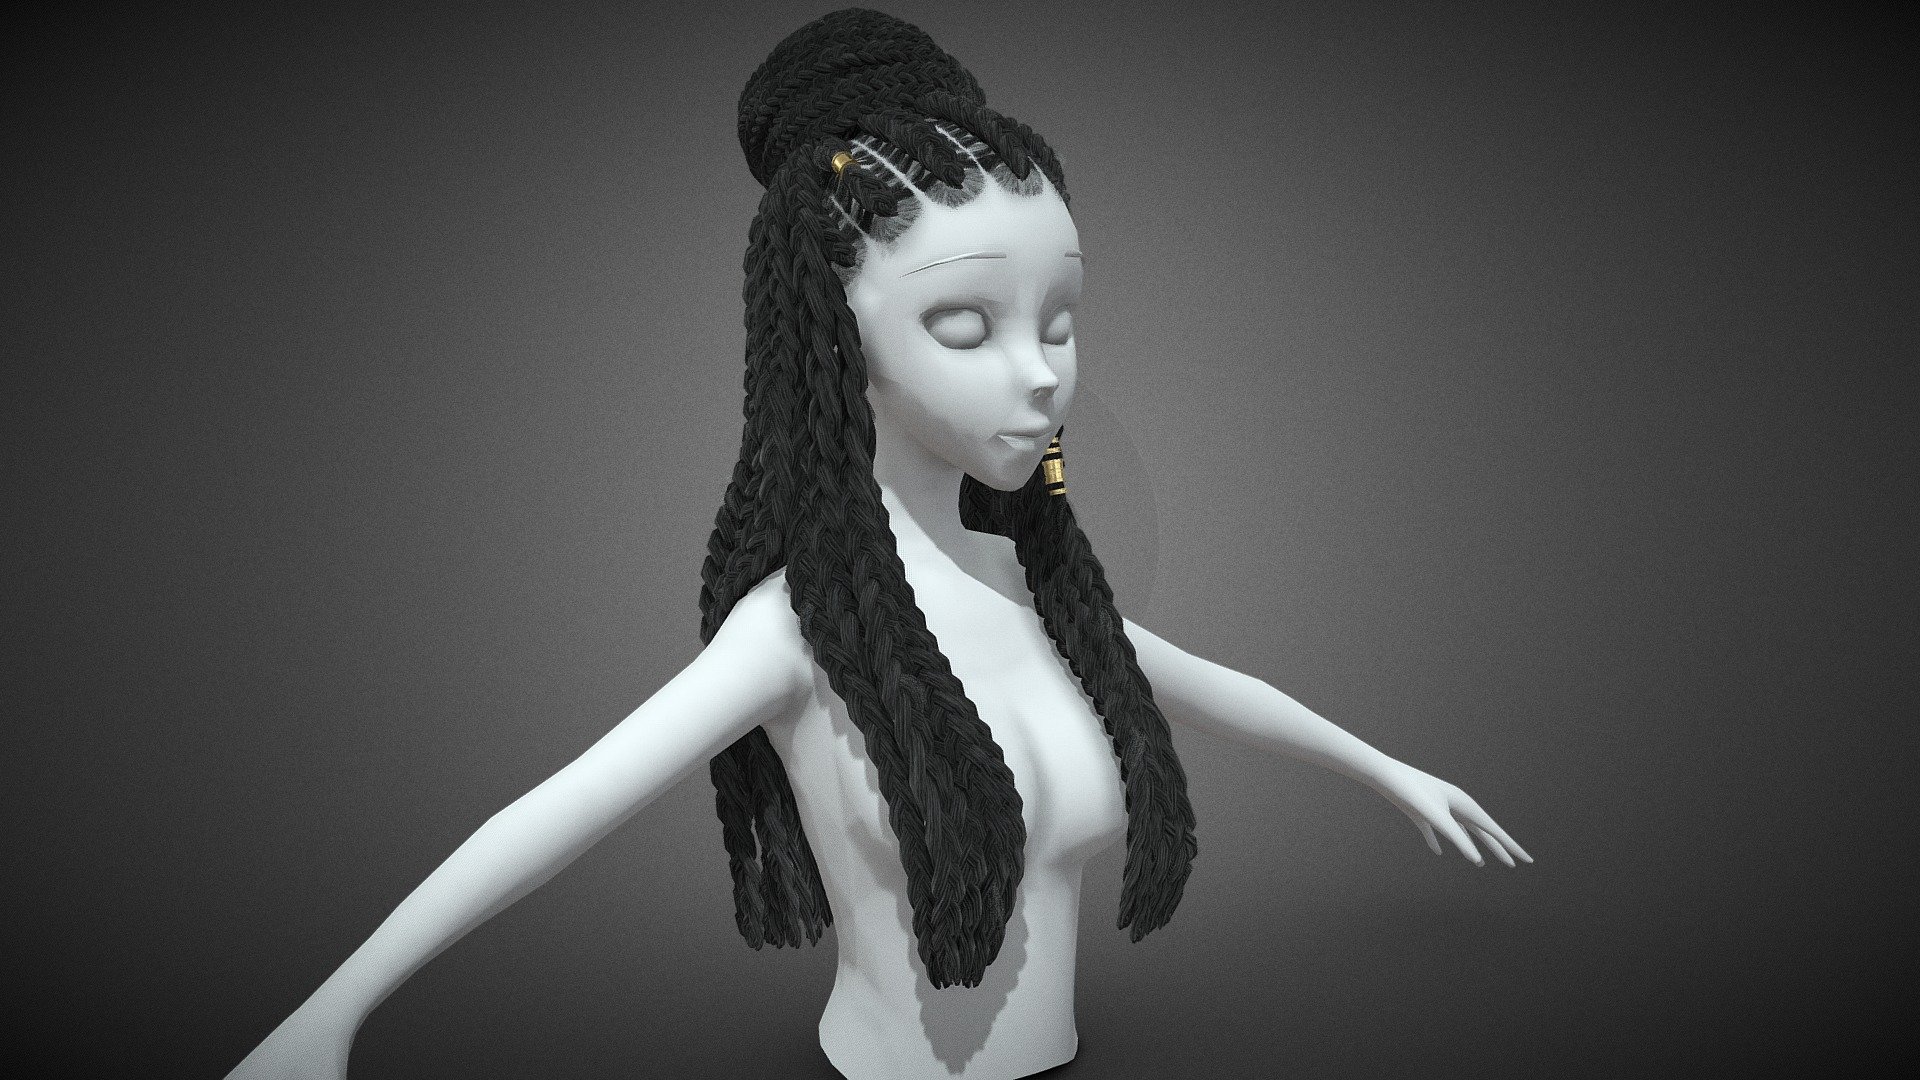 CG StudioX Present :
Female Hair Cards Style 8 - Braids And Knot 2 lowpoly/PBR




The photo been rendered using Marmoset Toolbag 4 (real time game engine )

The head model is decimated to show how the hair looks on the head.


Features :



Comes with Specular and Metalness PBR 4K texture .

Good topology.

Low polygon geometry.

The Model is prefect for game for both Specular workflow as in Unity and Metalness as in Unreal engine .

The model also rendered using Marmoset Toolbag 4 with both Specular and Metalness PBR and also included in the product with the full texture.

The texture can be easily adjustable .


Texture :



One set of UV for the Hair [Albedo -Normal-Metalness -Roughness-Gloss-Specular-Ao-Alpha-Depth-Direction-ID-Root] (4096*4096).

One set of UV for metal part [Albedo -Normal-Metalness -Roughness-Gloss-Specular-Ao] (4096*4096).


Files :
Marmoset Toolbag 4 ,Maya,,FBX,glTF,Blender,OBj with all the textures.




Contact me for if you have any questions.
 - Female Hair Cards Style 8 - Braids And Knot 2 - Buy Royalty Free 3D model by CG StudioX (@CG_StudioX) 3d model